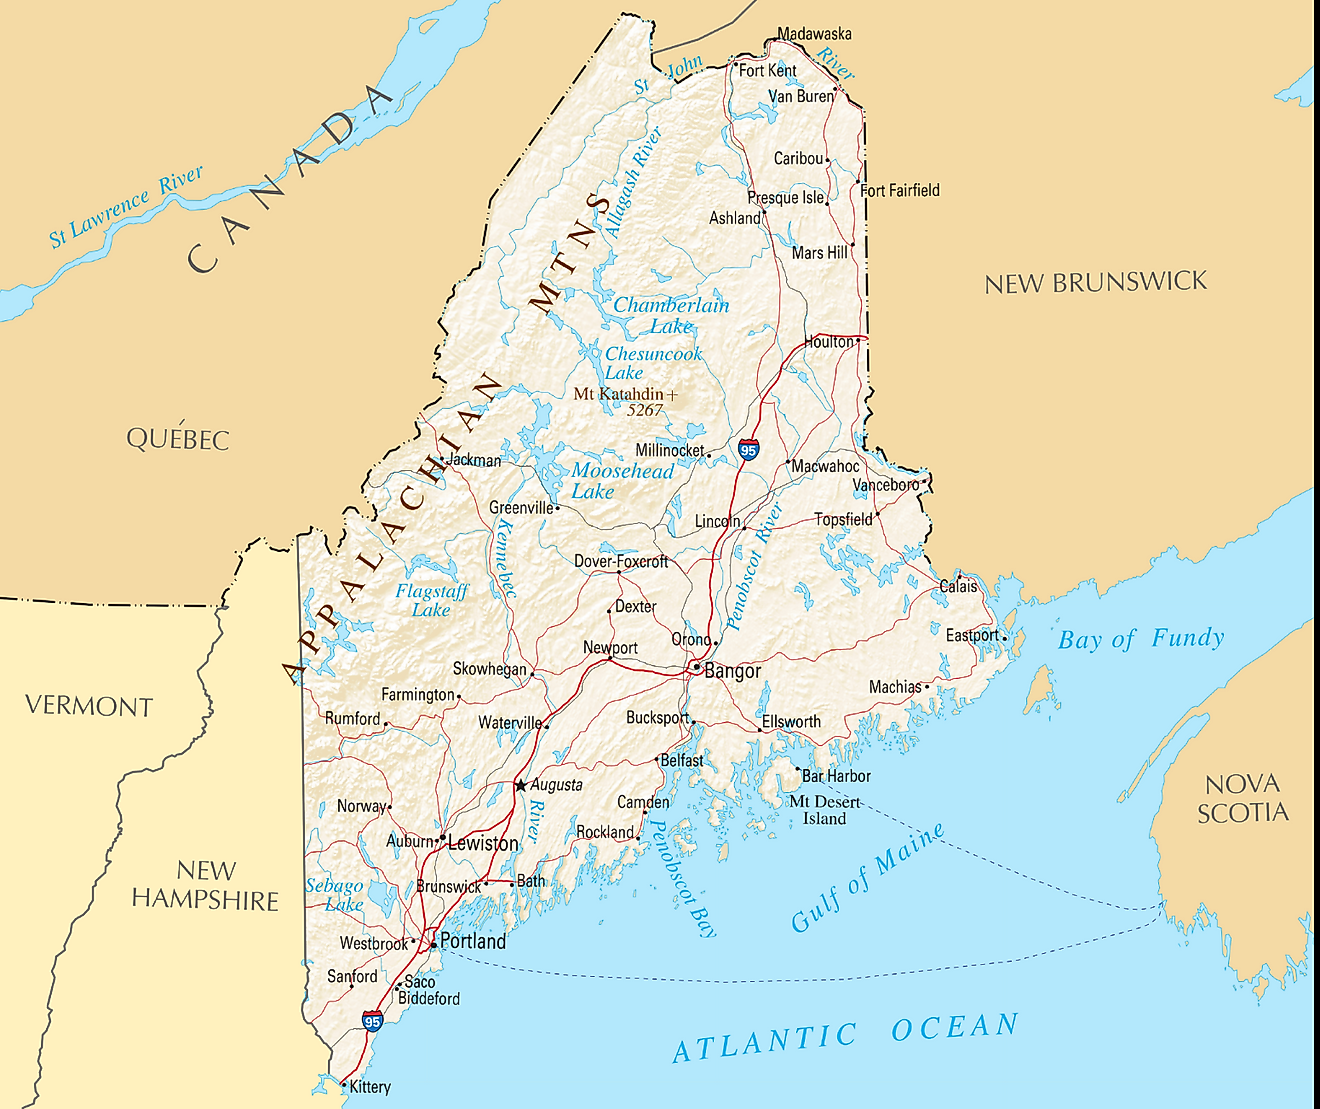 The US State of Maine Shares Its Borders With The US State of New Hampshire and The Canadian Provinces Of Quebec And New Brunswick.